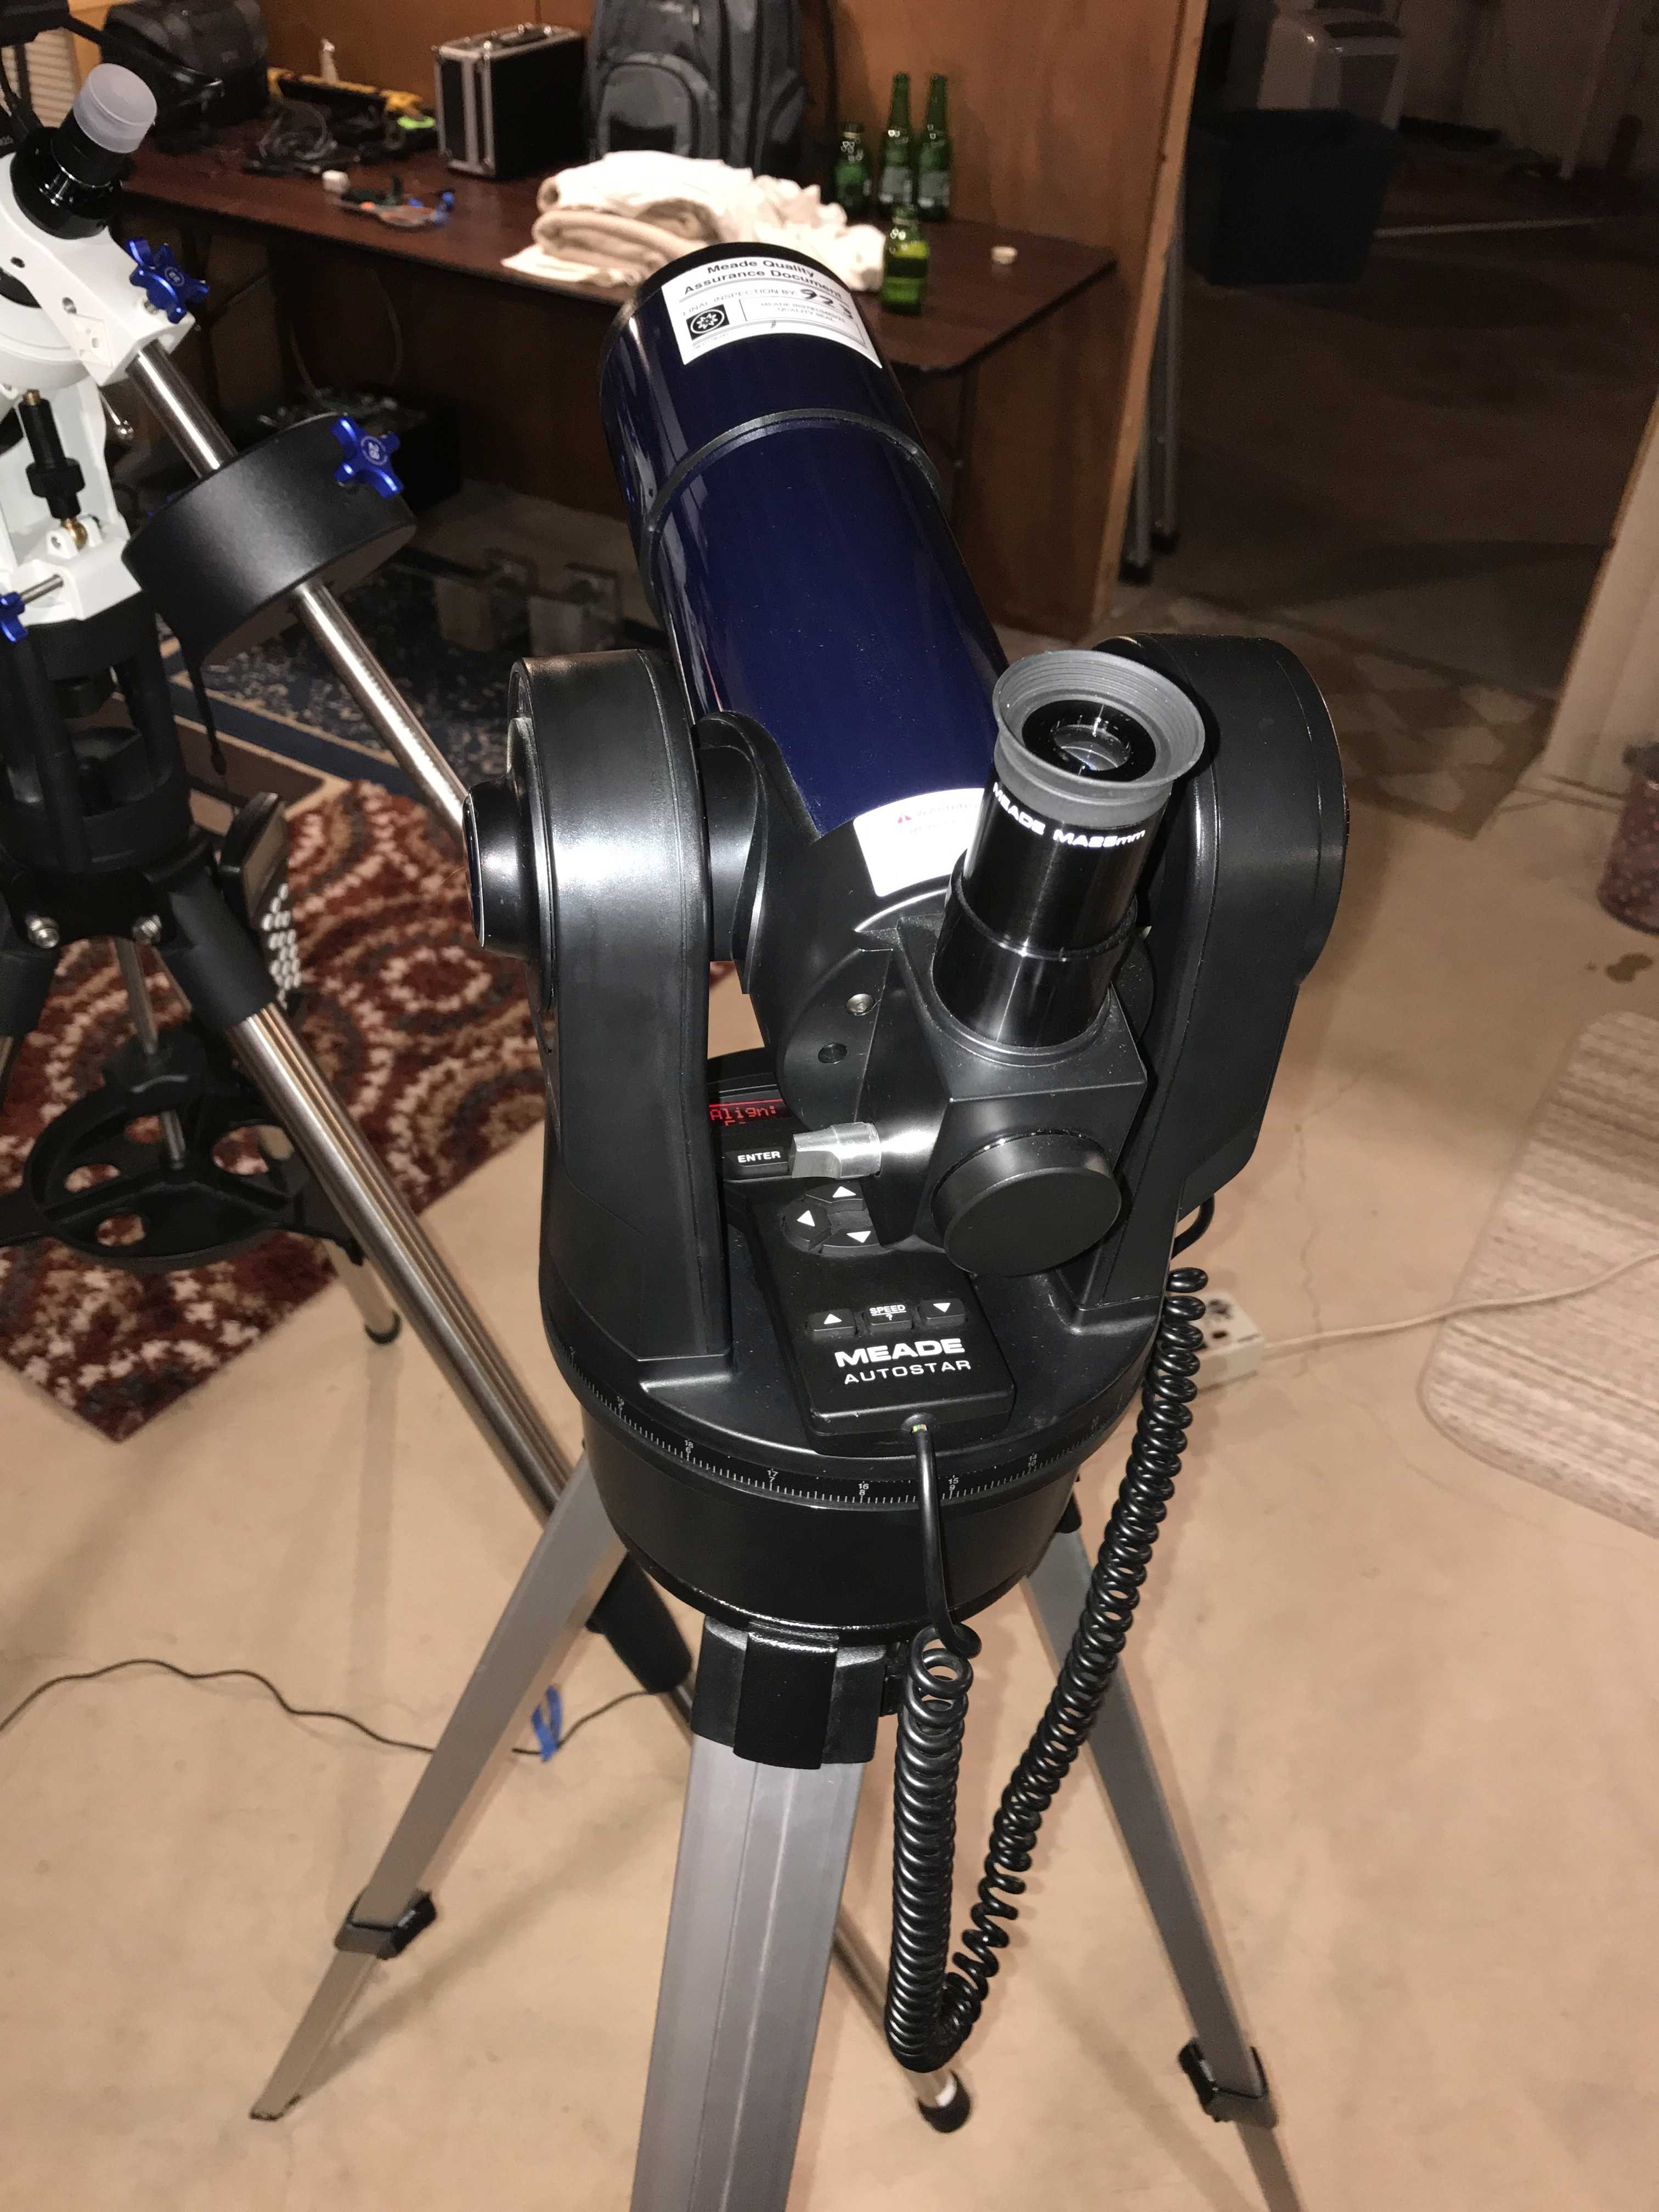 meade etx 70 for sale